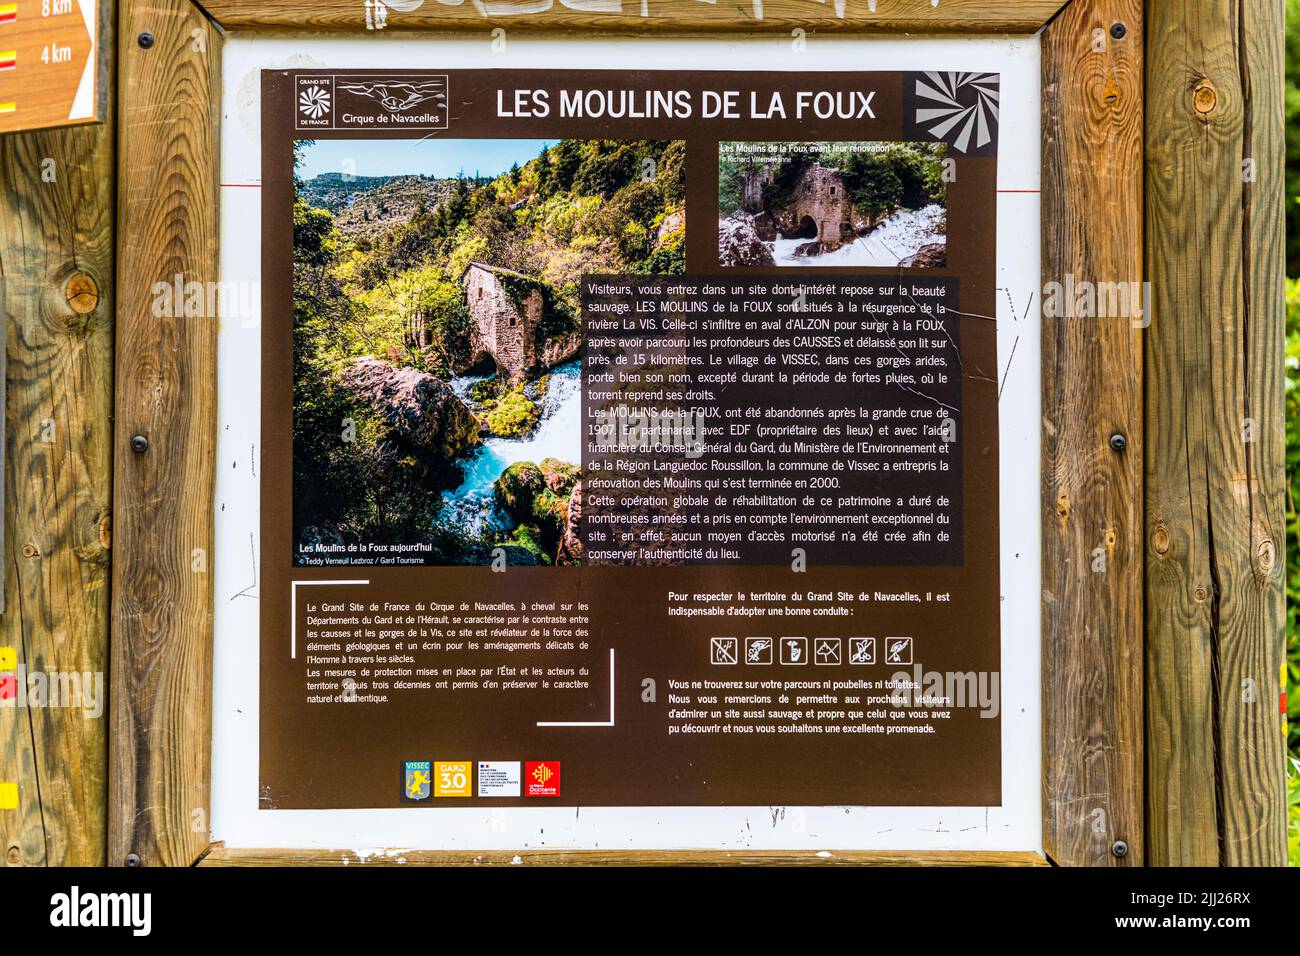 A sign at the starting point of the hike asks for understanding that there are neither trash cans nor toilets at the authentically restored Moulins de la Foux, France Stock Photo